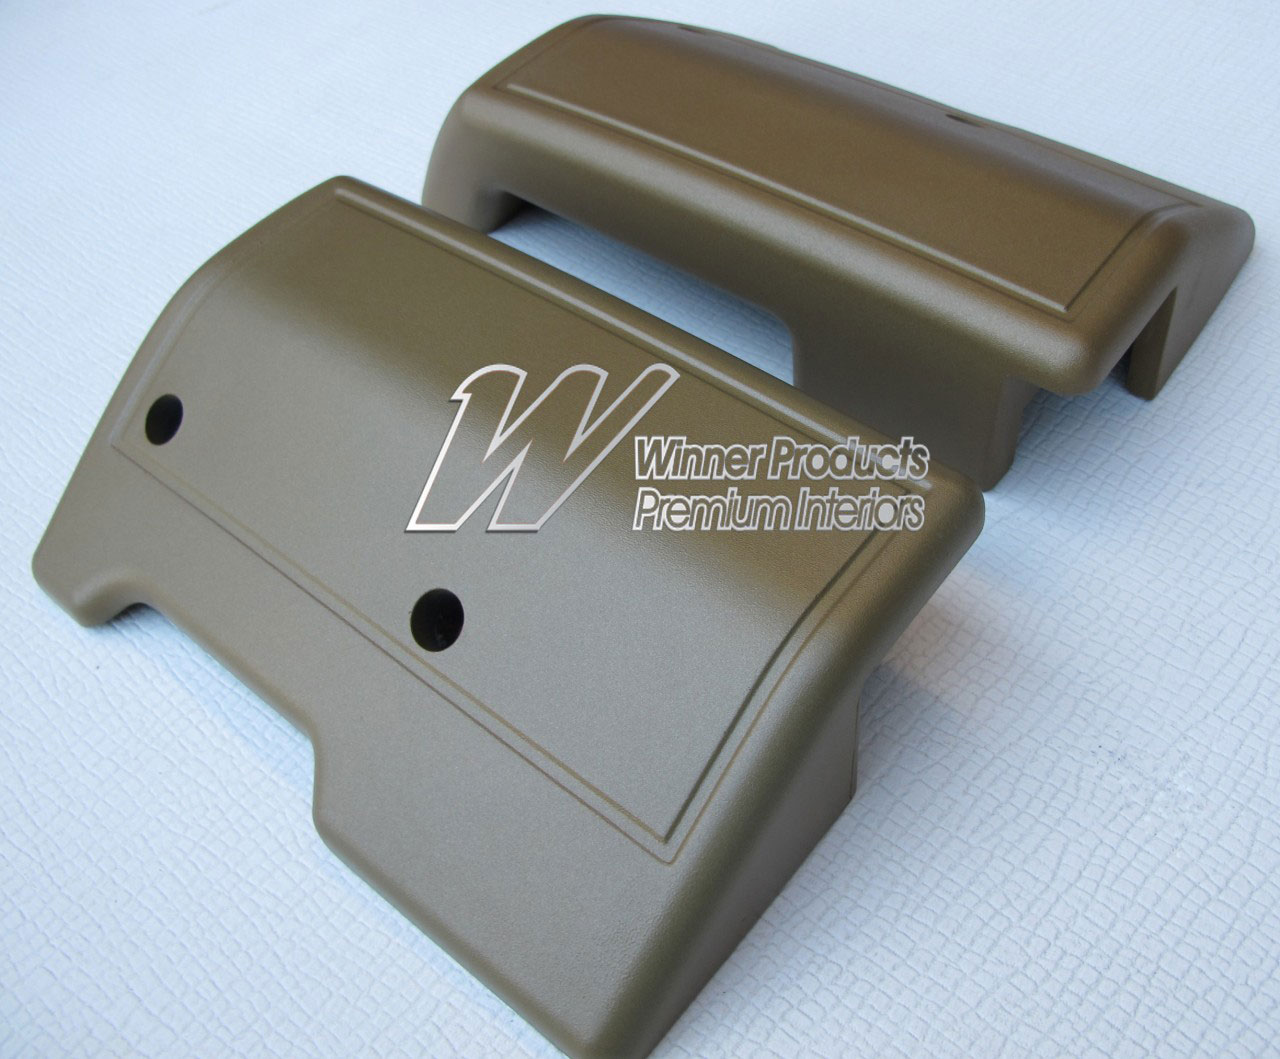 Holden Monaro HG Monaro Coupe 11X Antique Gold Arm Rests (Image 1 of 1)